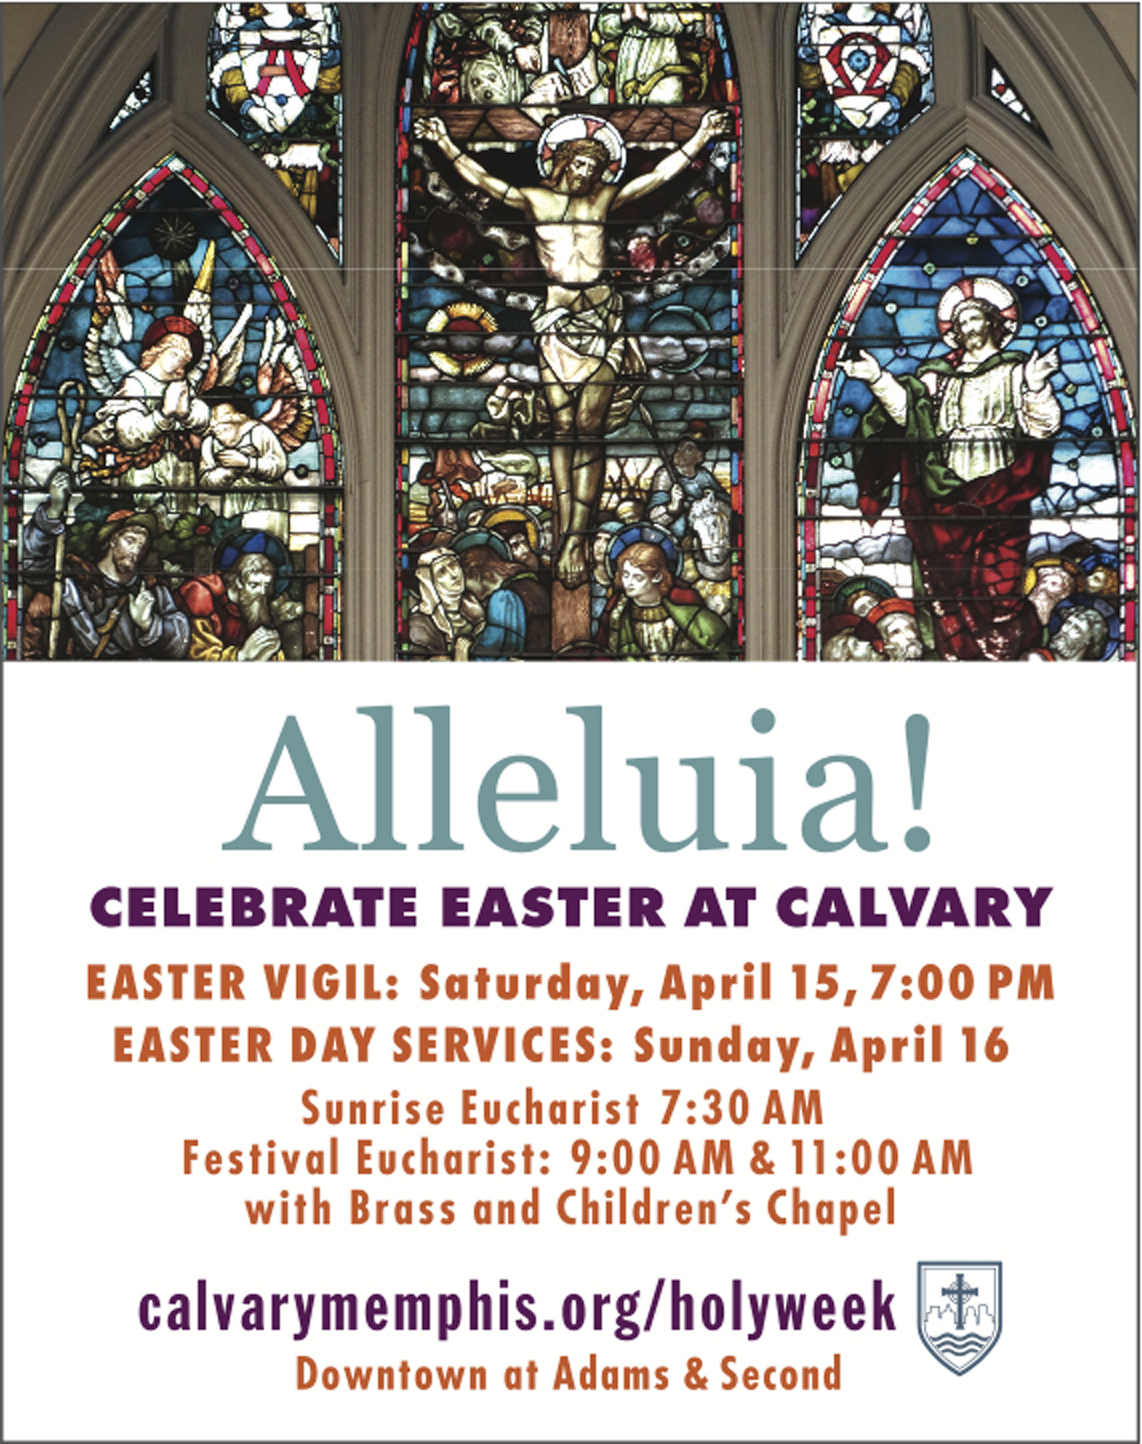  Calvary Easter Memphis Magazine ad  Creative, headline copywriting and design by Chuck Mitchell  Photograph by Chuck Mitchell 